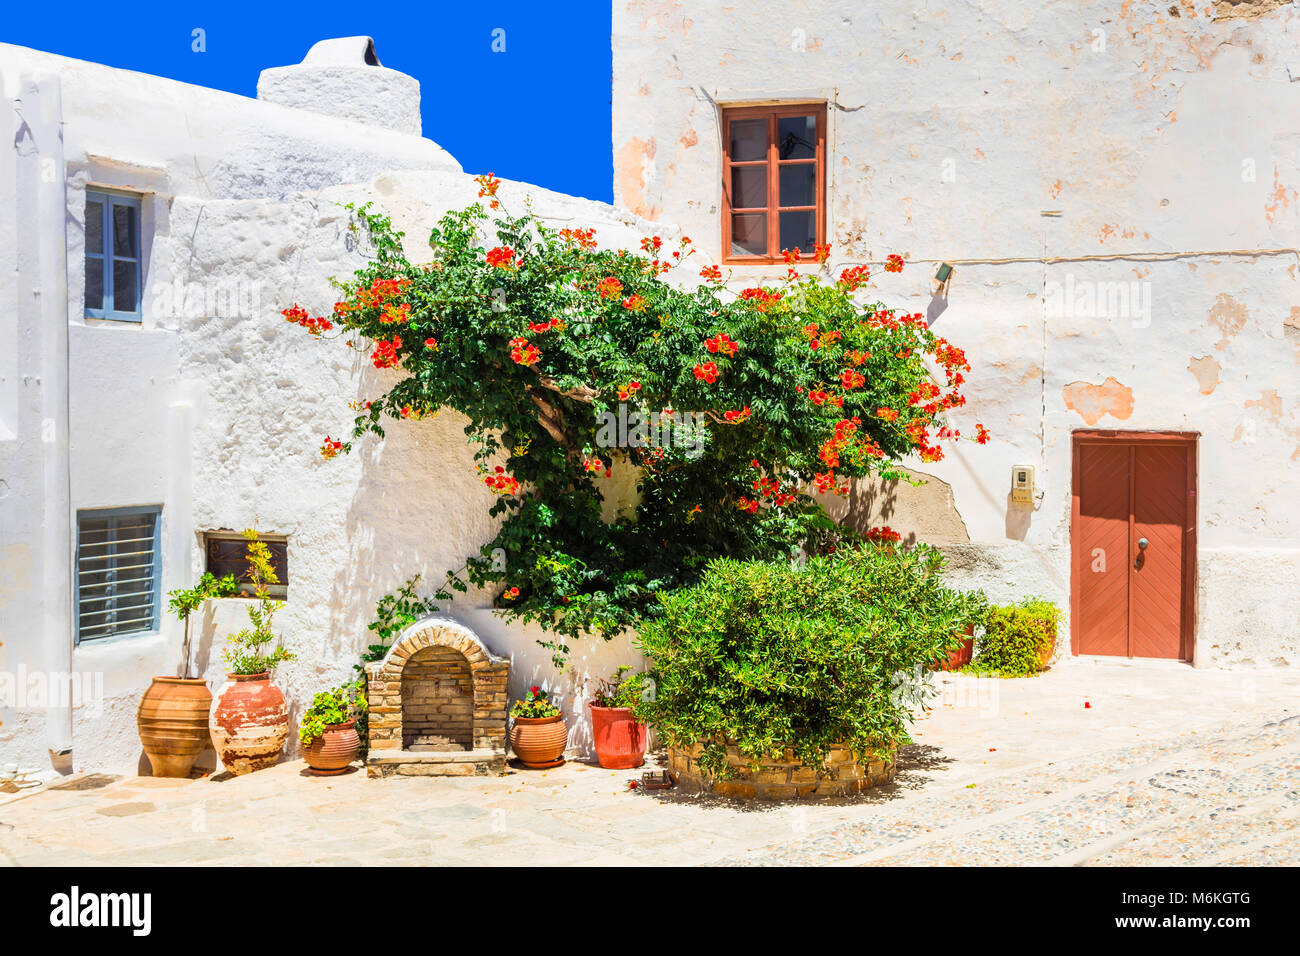 Old streets of Greece,view withf door,windows and floral decoration,naxos. Stock Photo